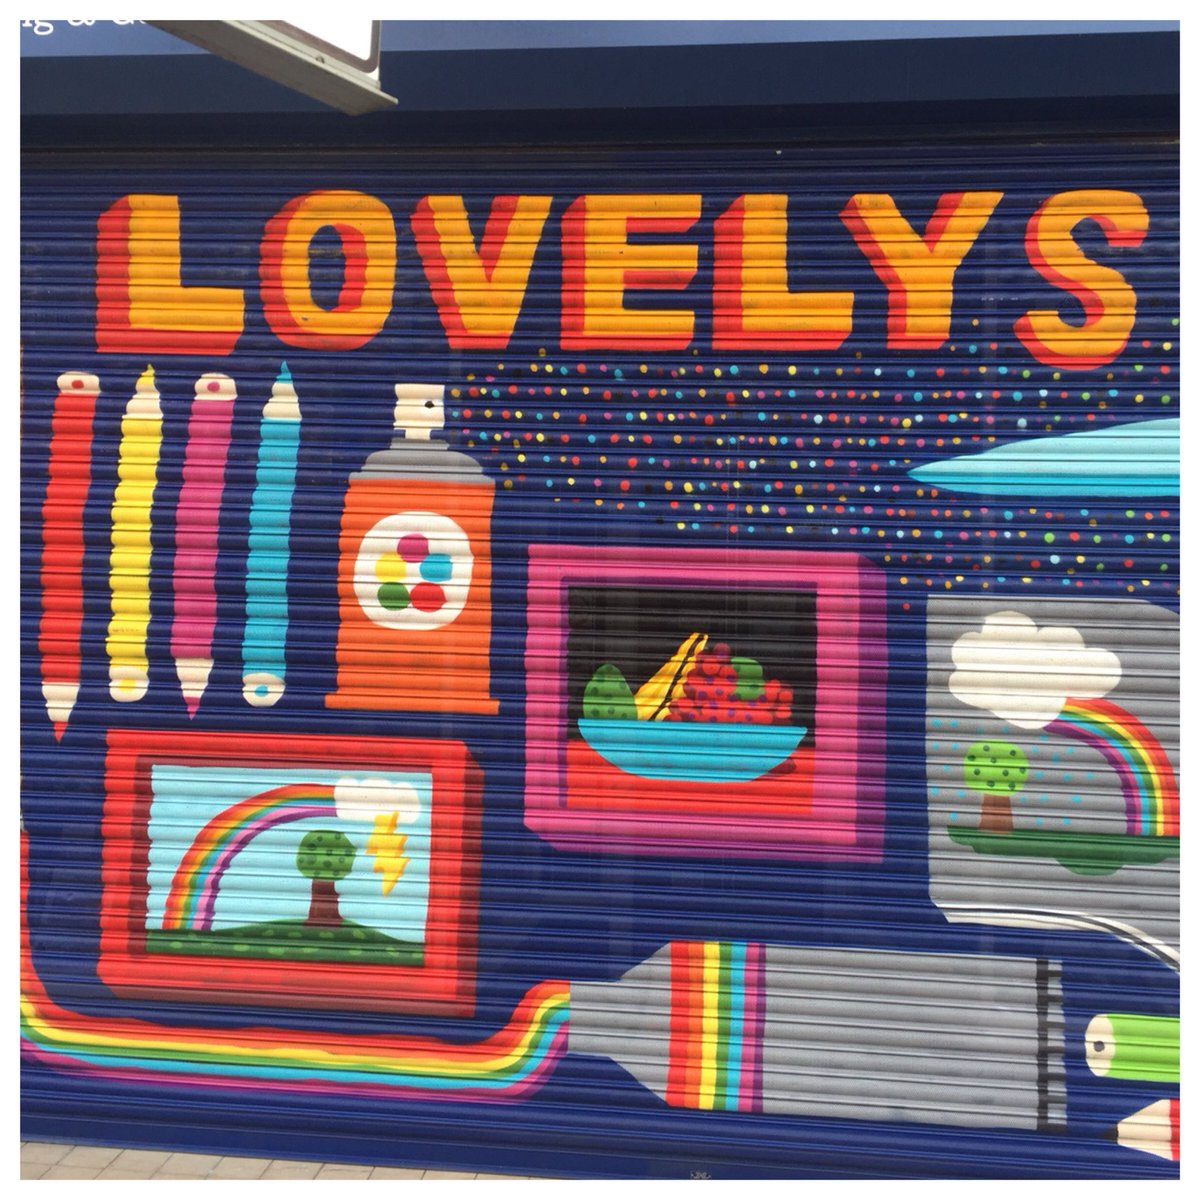 The lovely @LovelysGallery adding some incredibly vibrant #Colour to the #NorthdownRoad. This beautiful shutter #mural is by #davidshillinglaw #CliftonvilleInColour #Cliftonville #Margate #art #design #creative #shoplocal